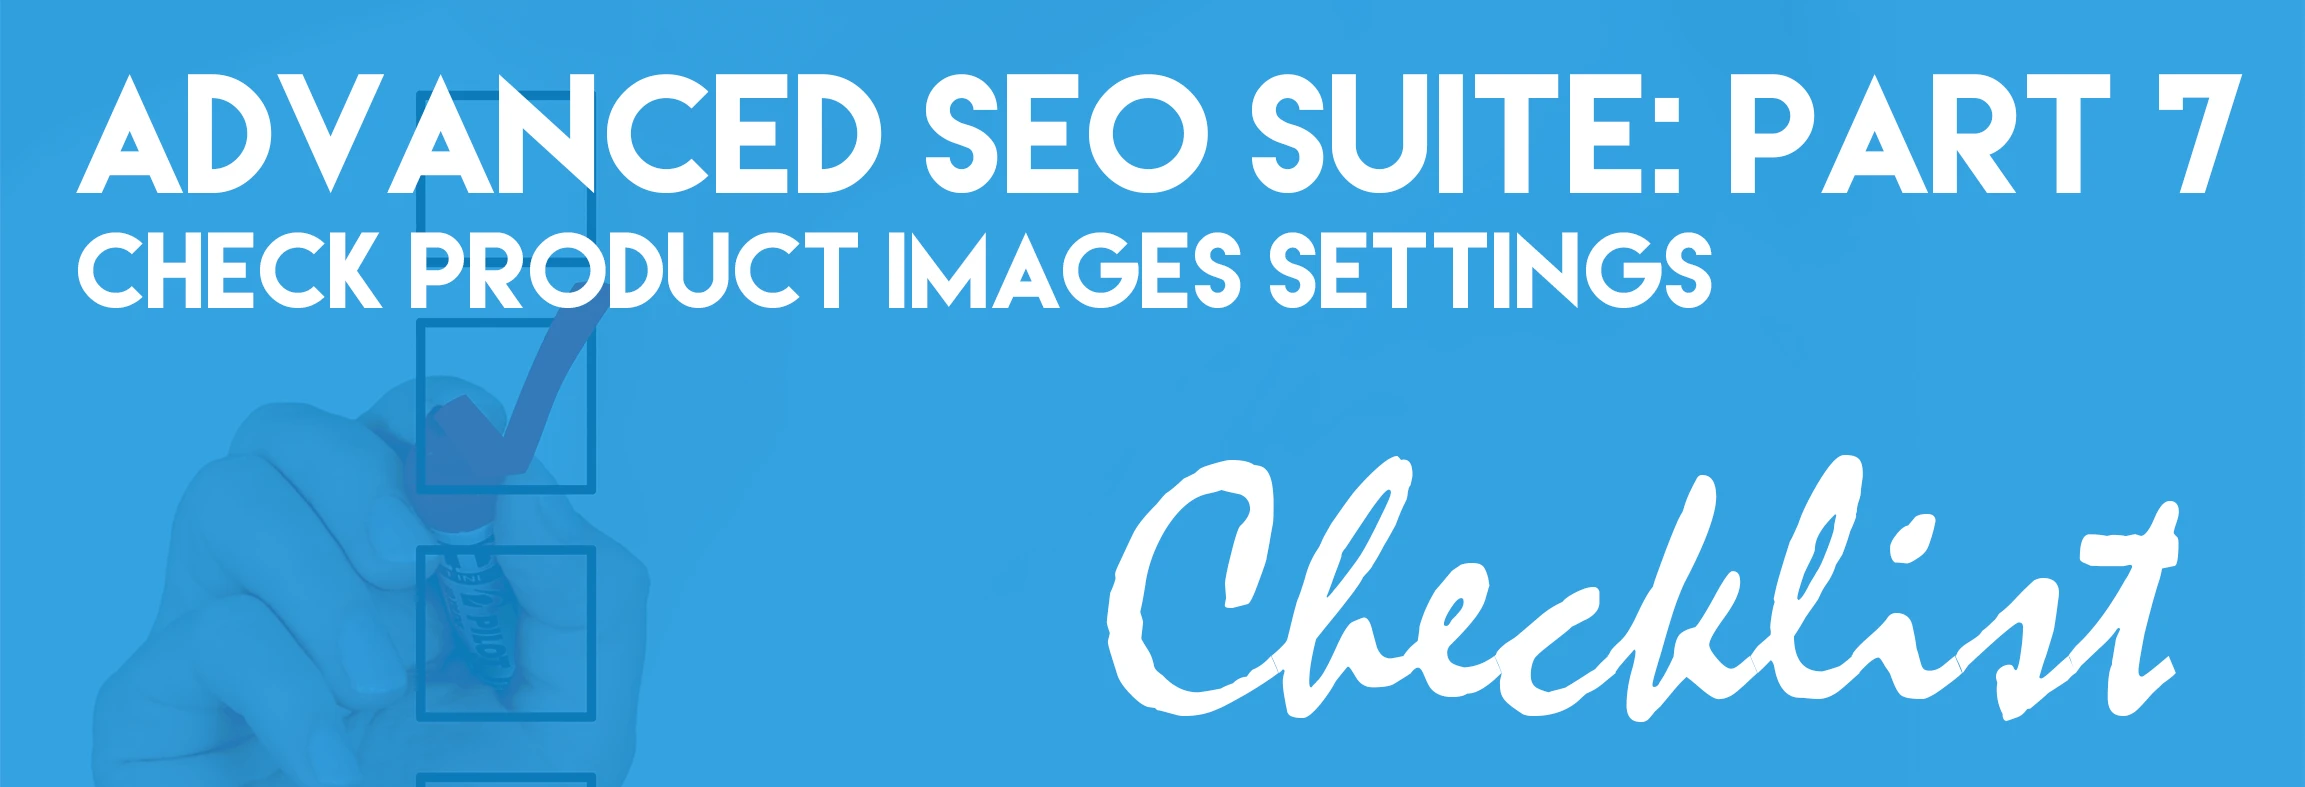 Advanced SEO Suite Onboarding Checklist (Part 7): Check Product Images Settings